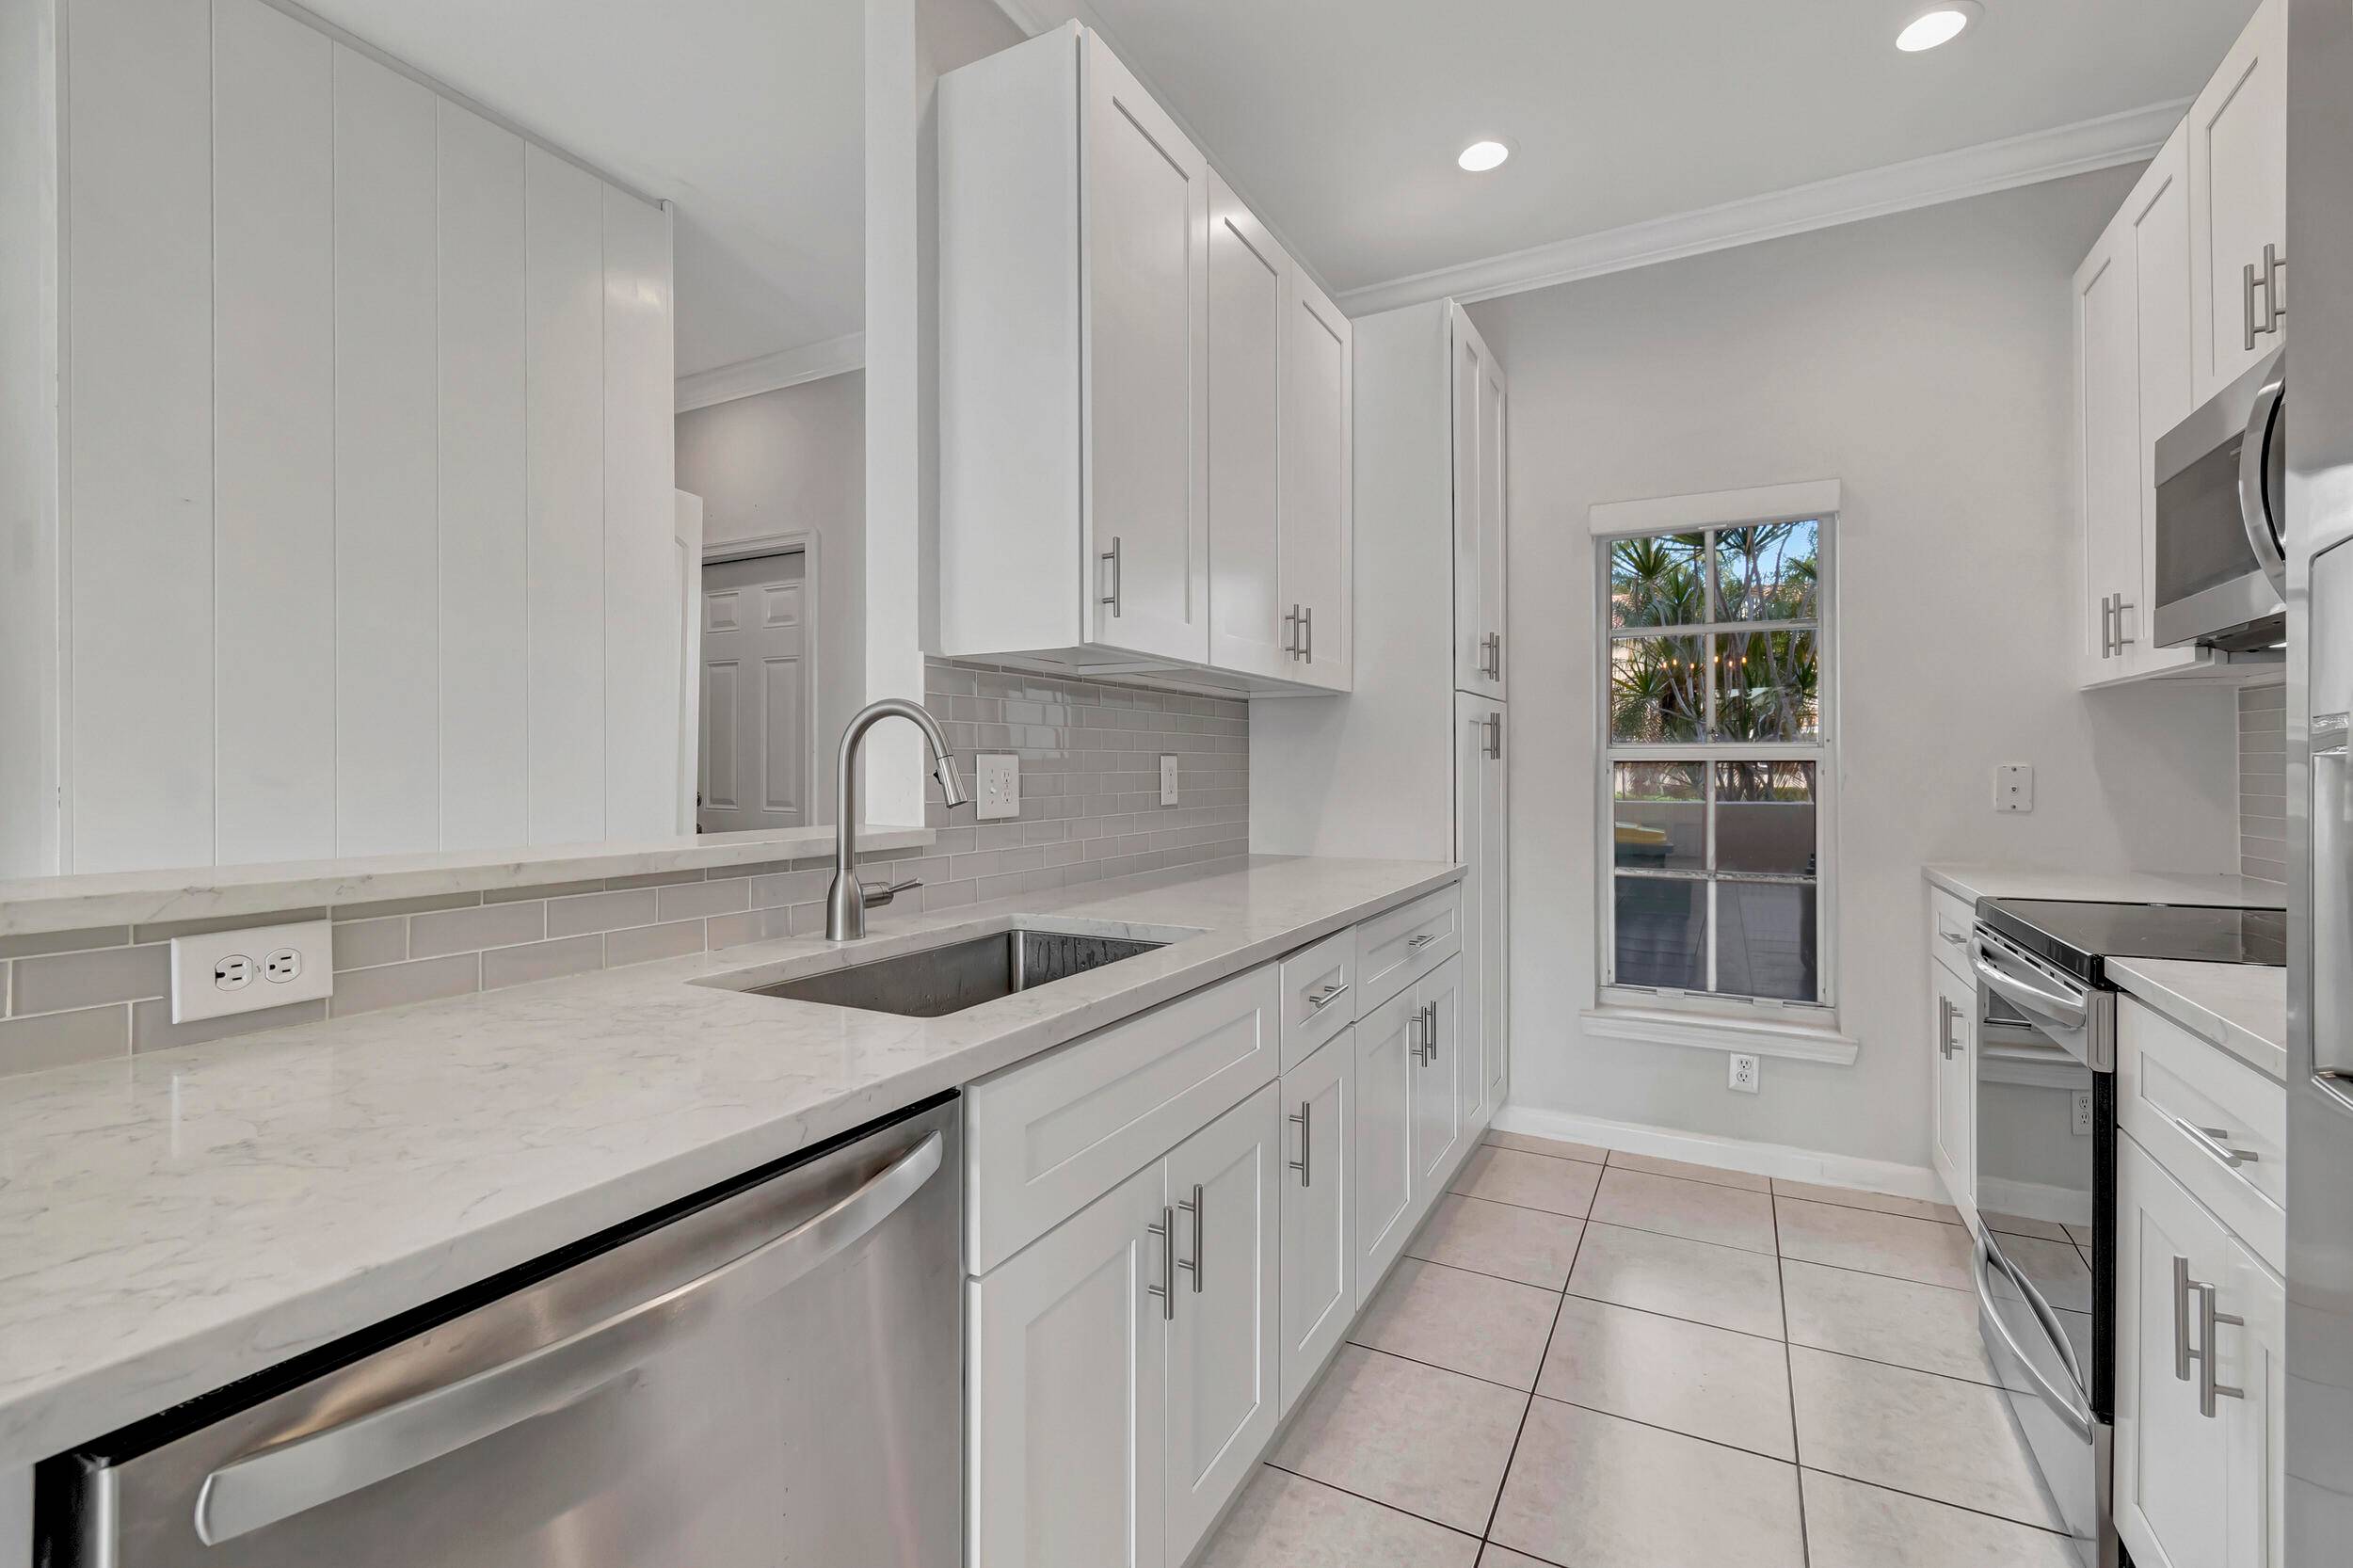 Enjoy life lived more beautifully in this modern townhome located in the desirable Banyan Oakbridge in Dania Beach, this outstanding 3 bed 2.